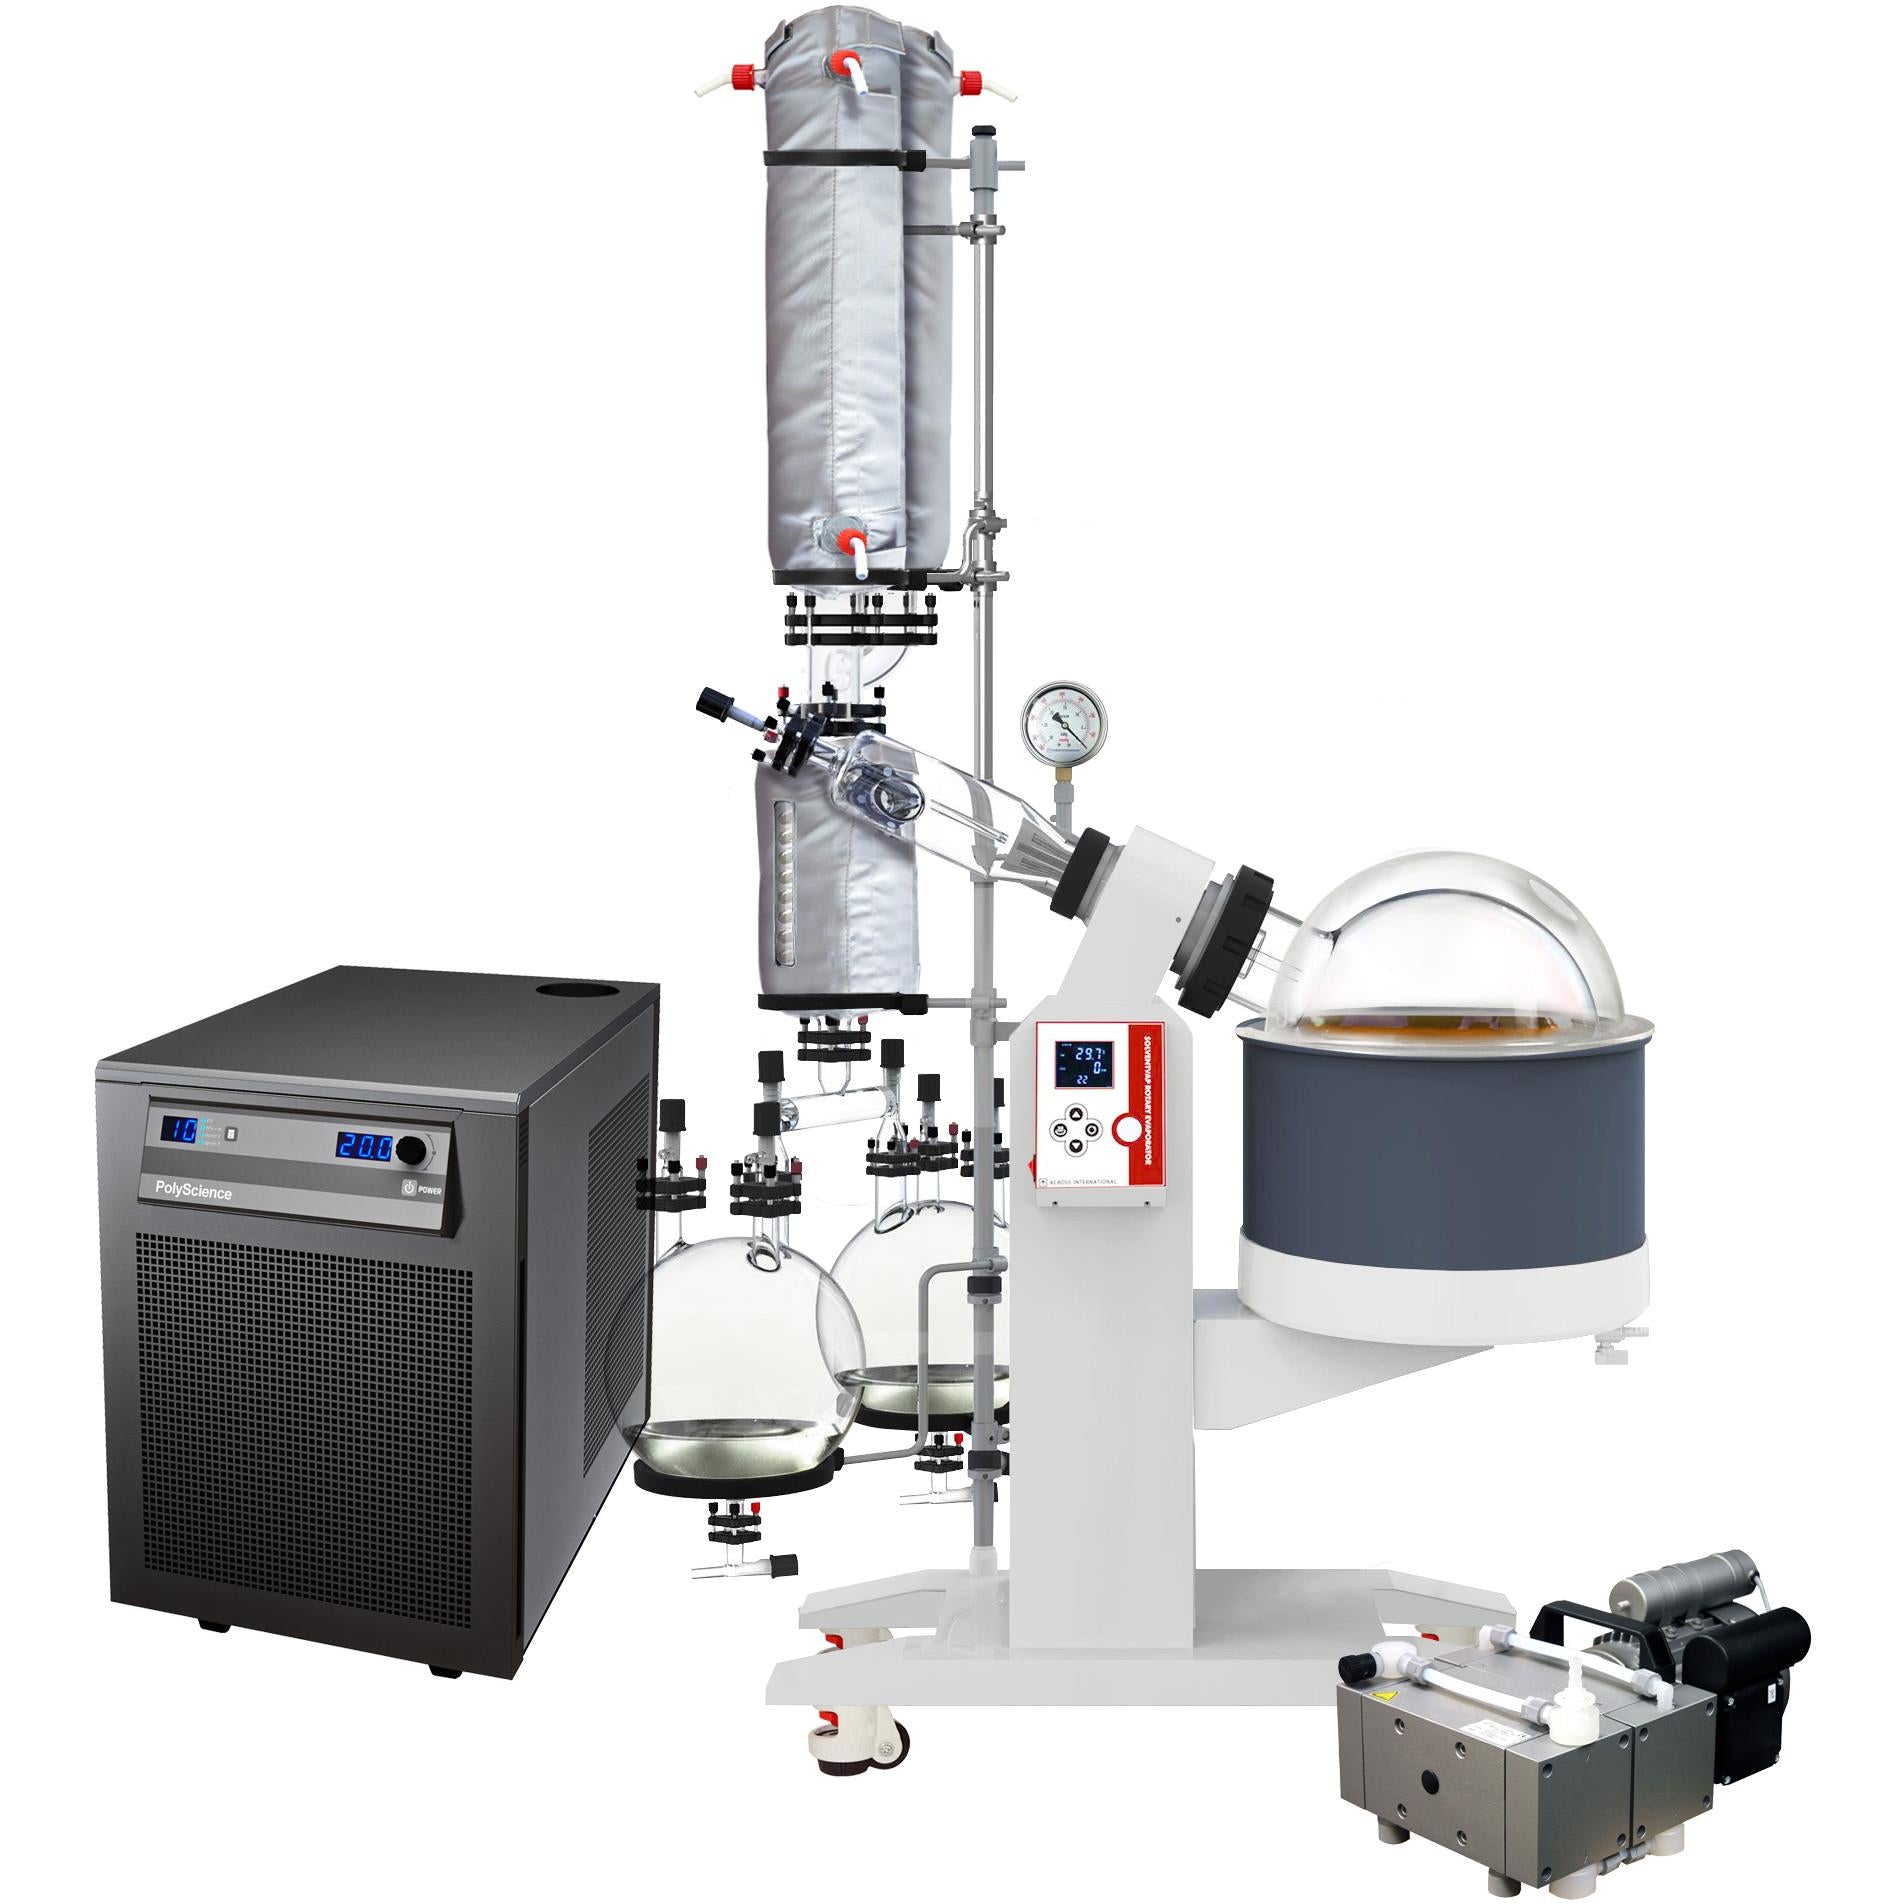 Ai SolventVap 20L Rotary Evaporator, Turnkey, with PolyScience Chiller and Welch Pump